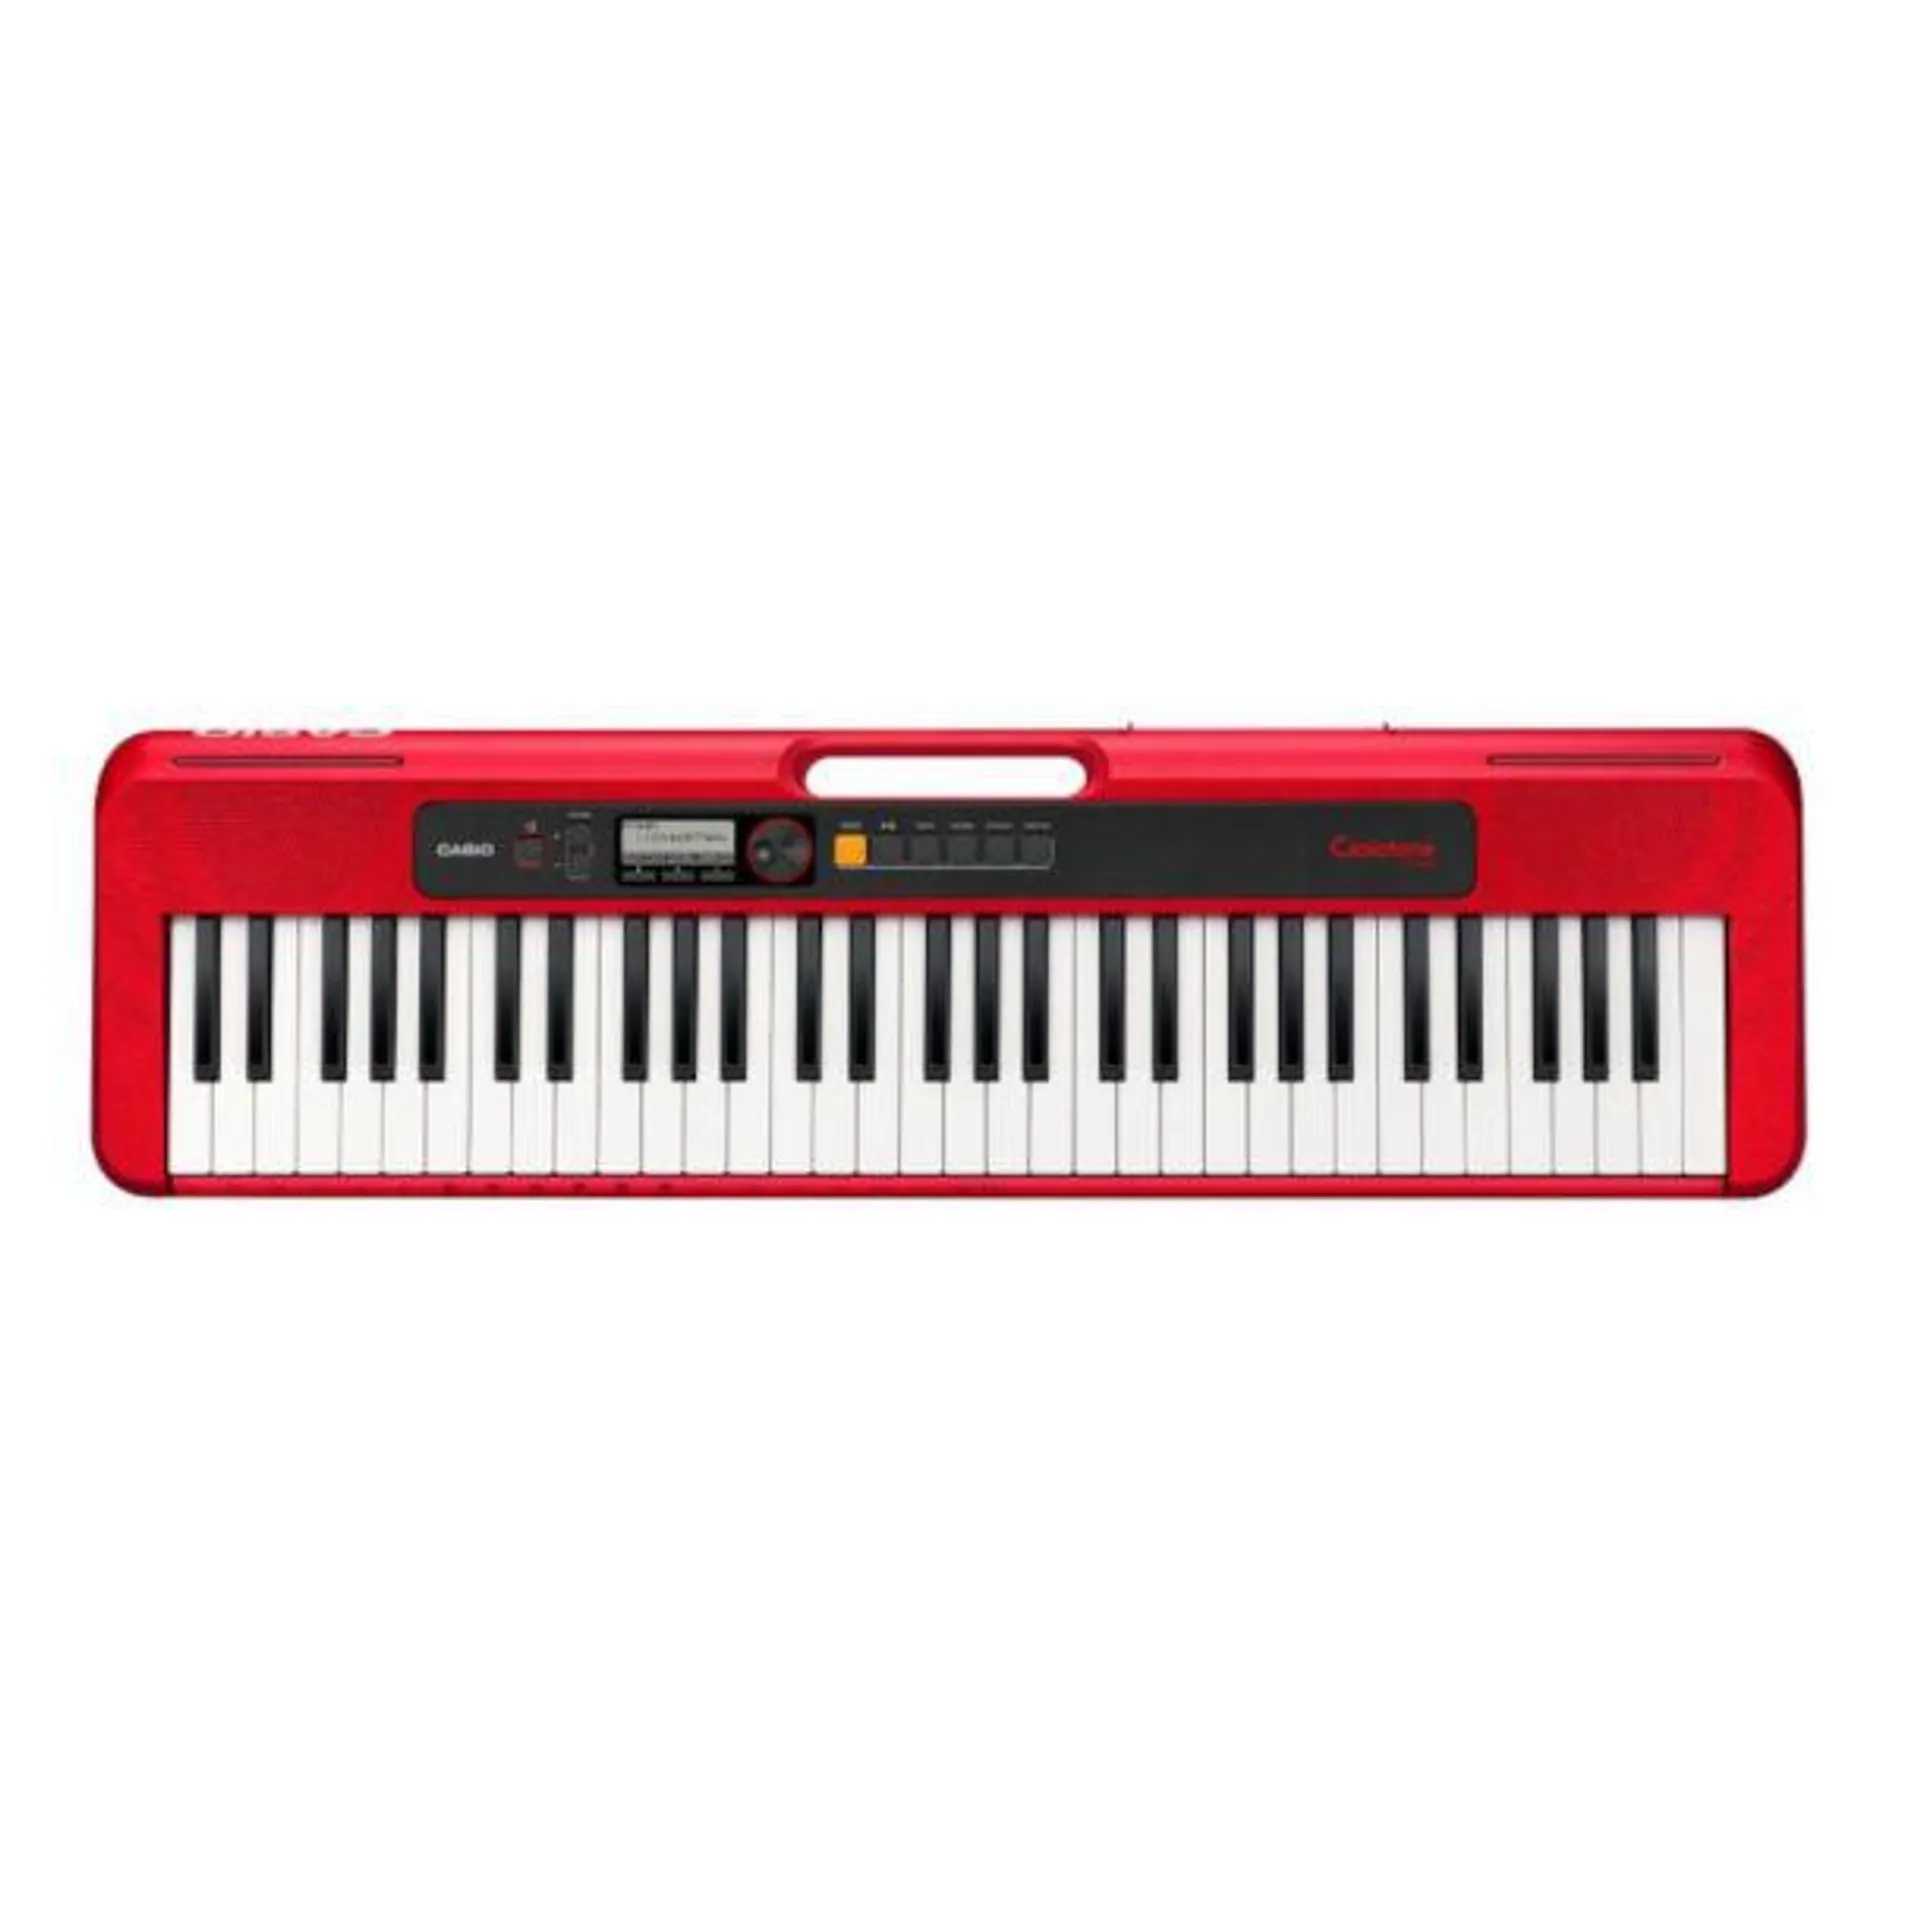 Casio CT-S200 Portable 61-Key Keyboard - Red